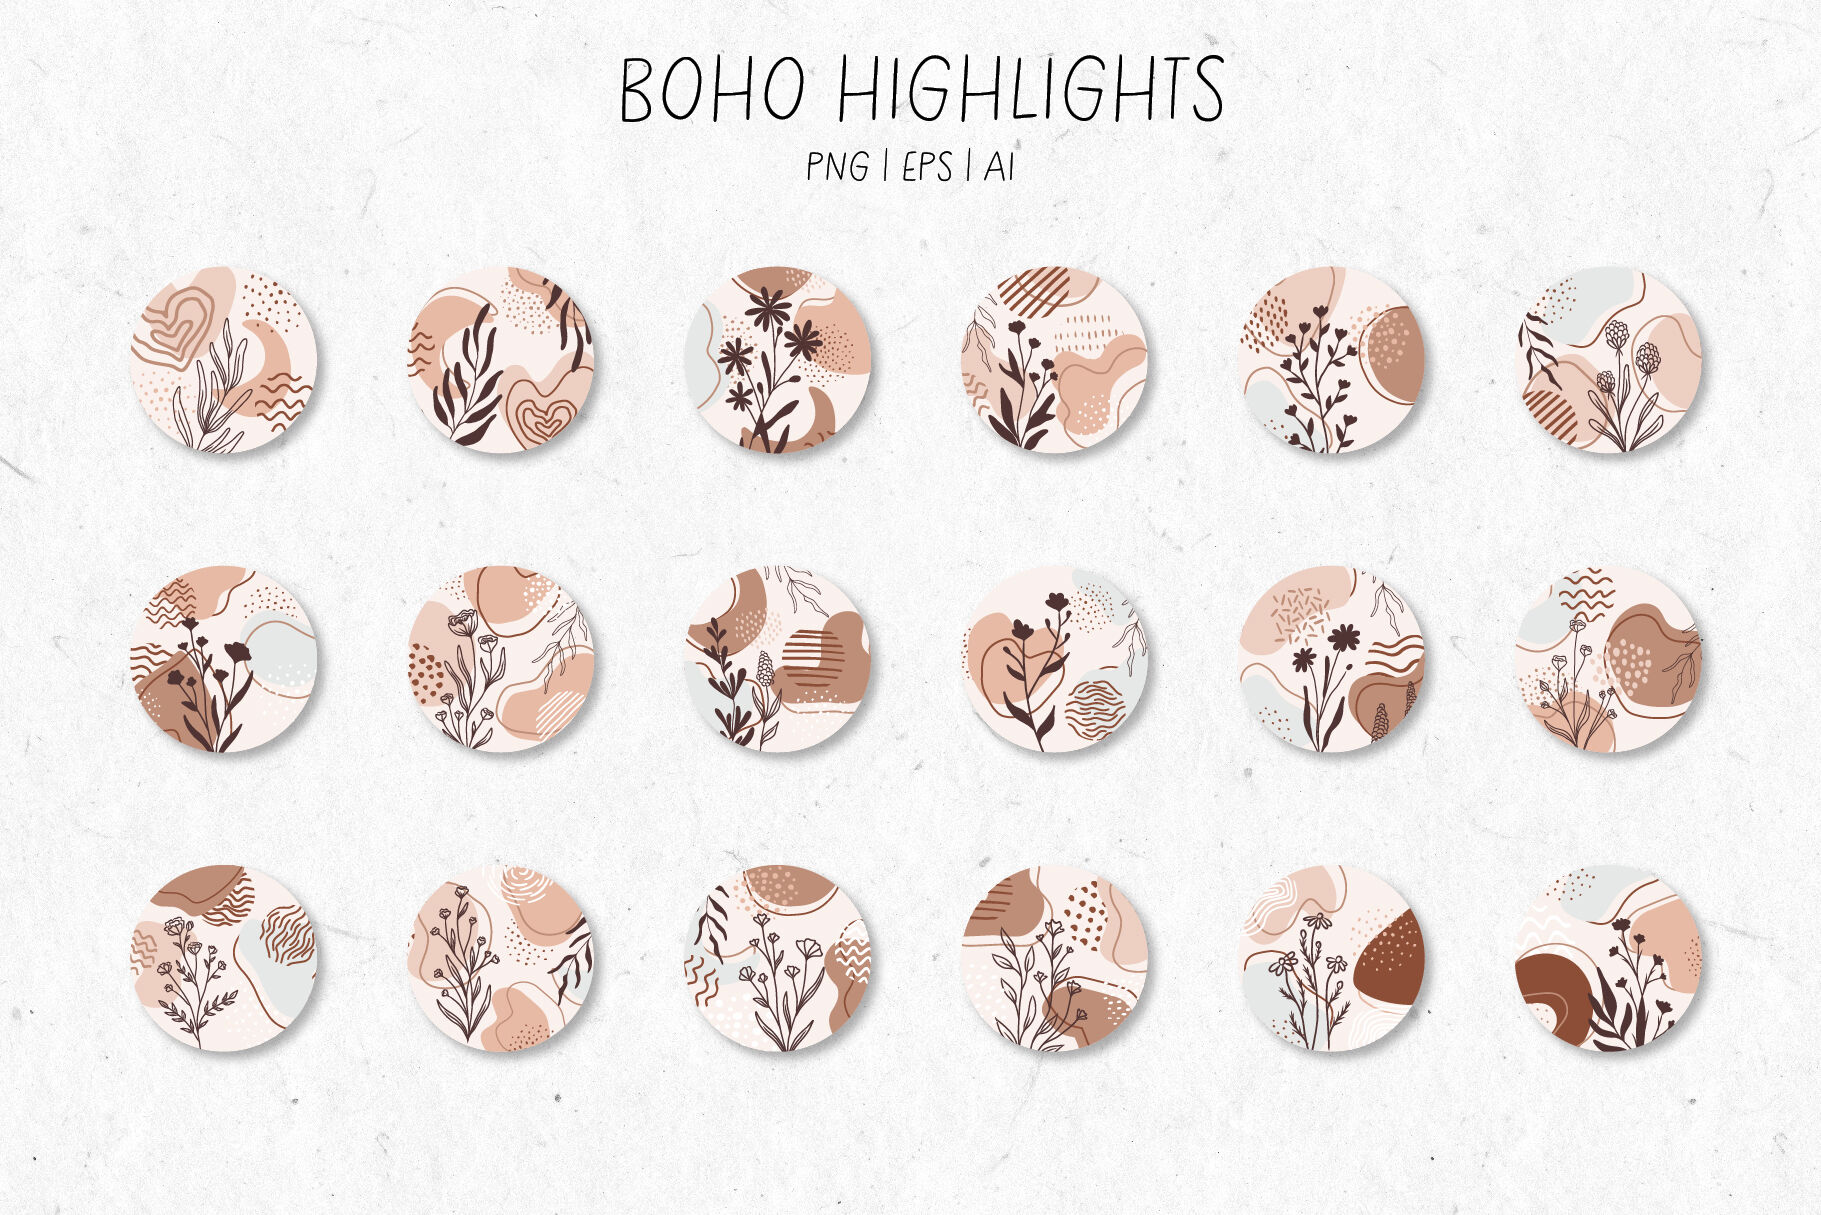 30 Instagram Story Highlight Icons Abstract Boho Line Art Social Media  Icons Instagram Icons Text Minimalist Instagram Highlight Covers -   Norway